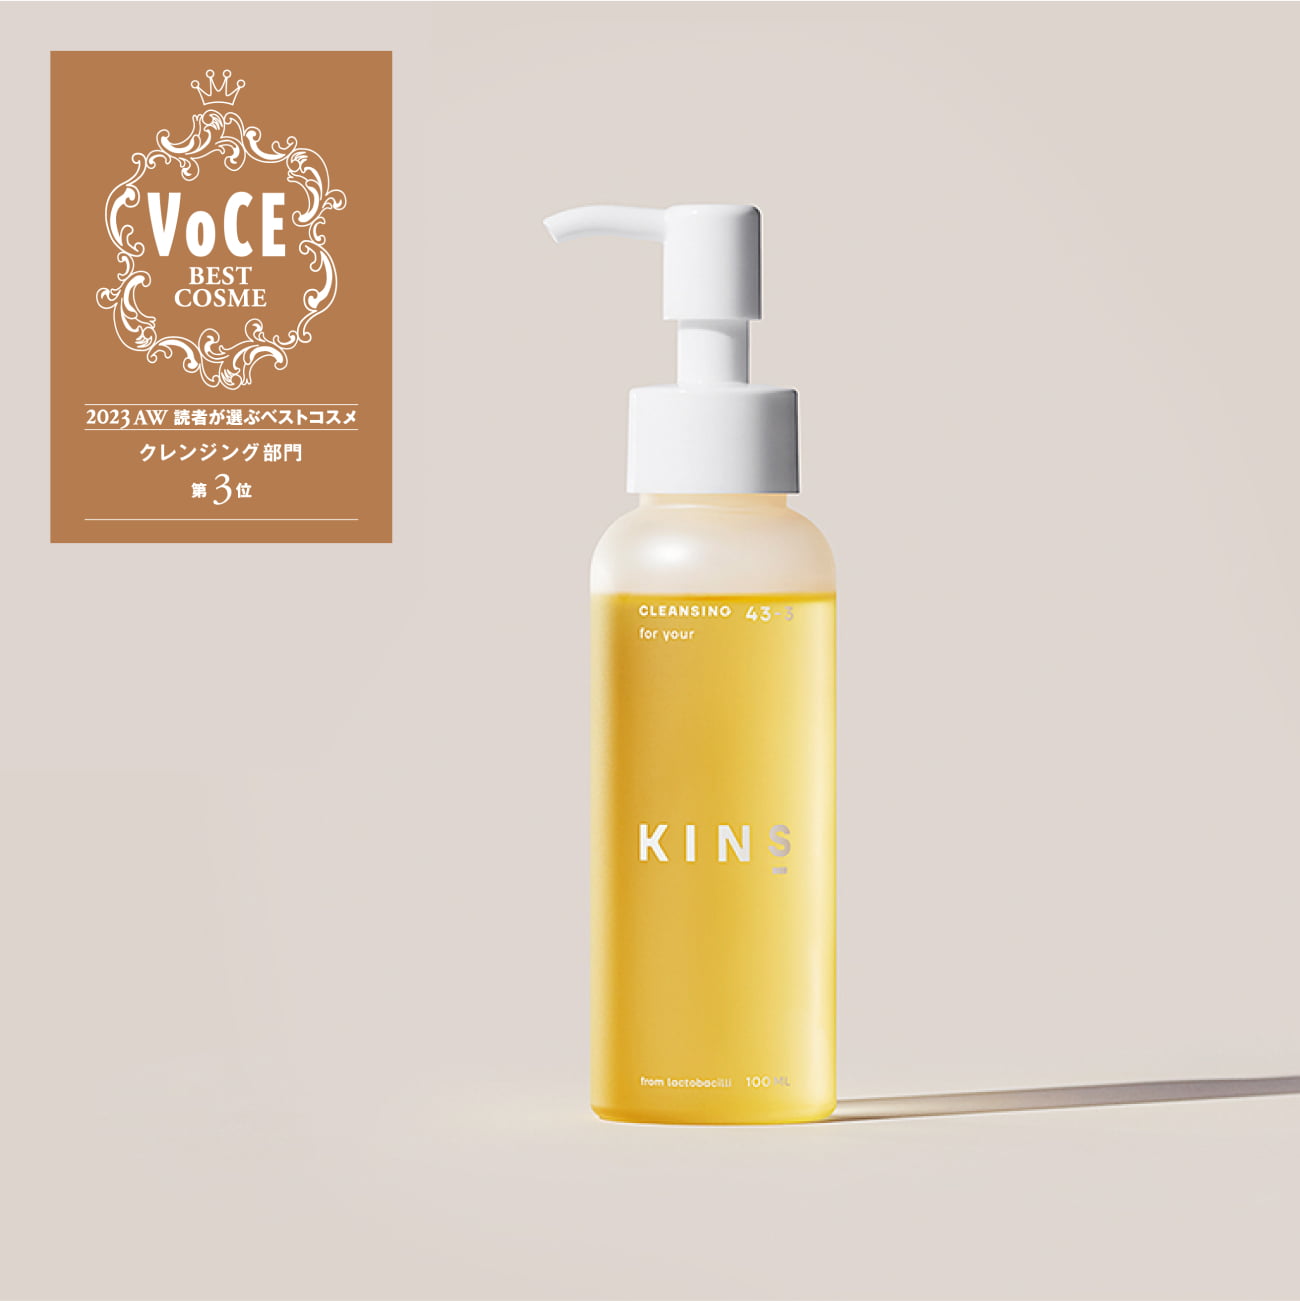 PRODUCTS | KINS